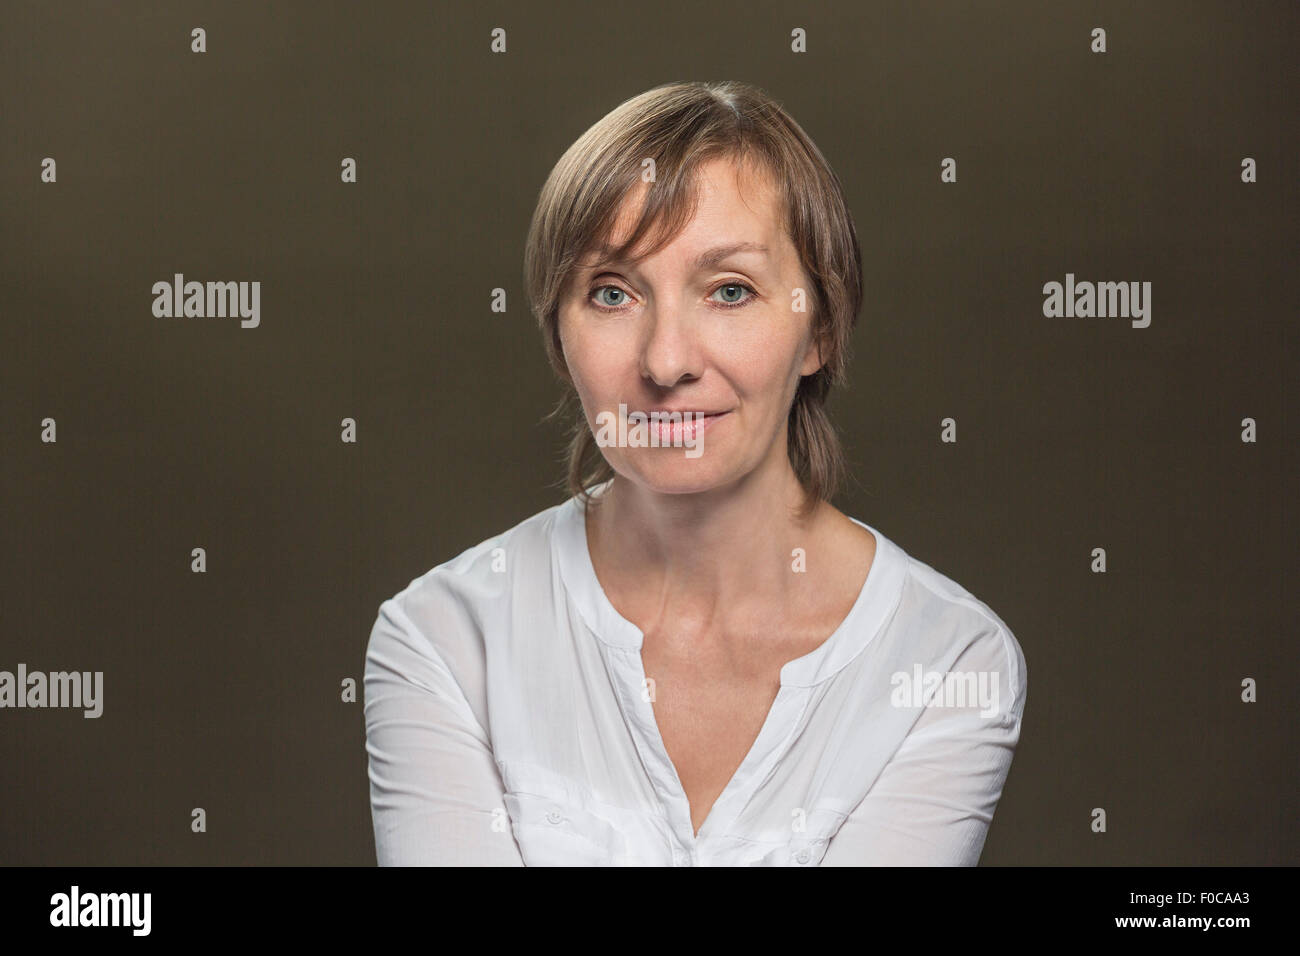 Portrait of confident mature woman over gray background Stock Photo